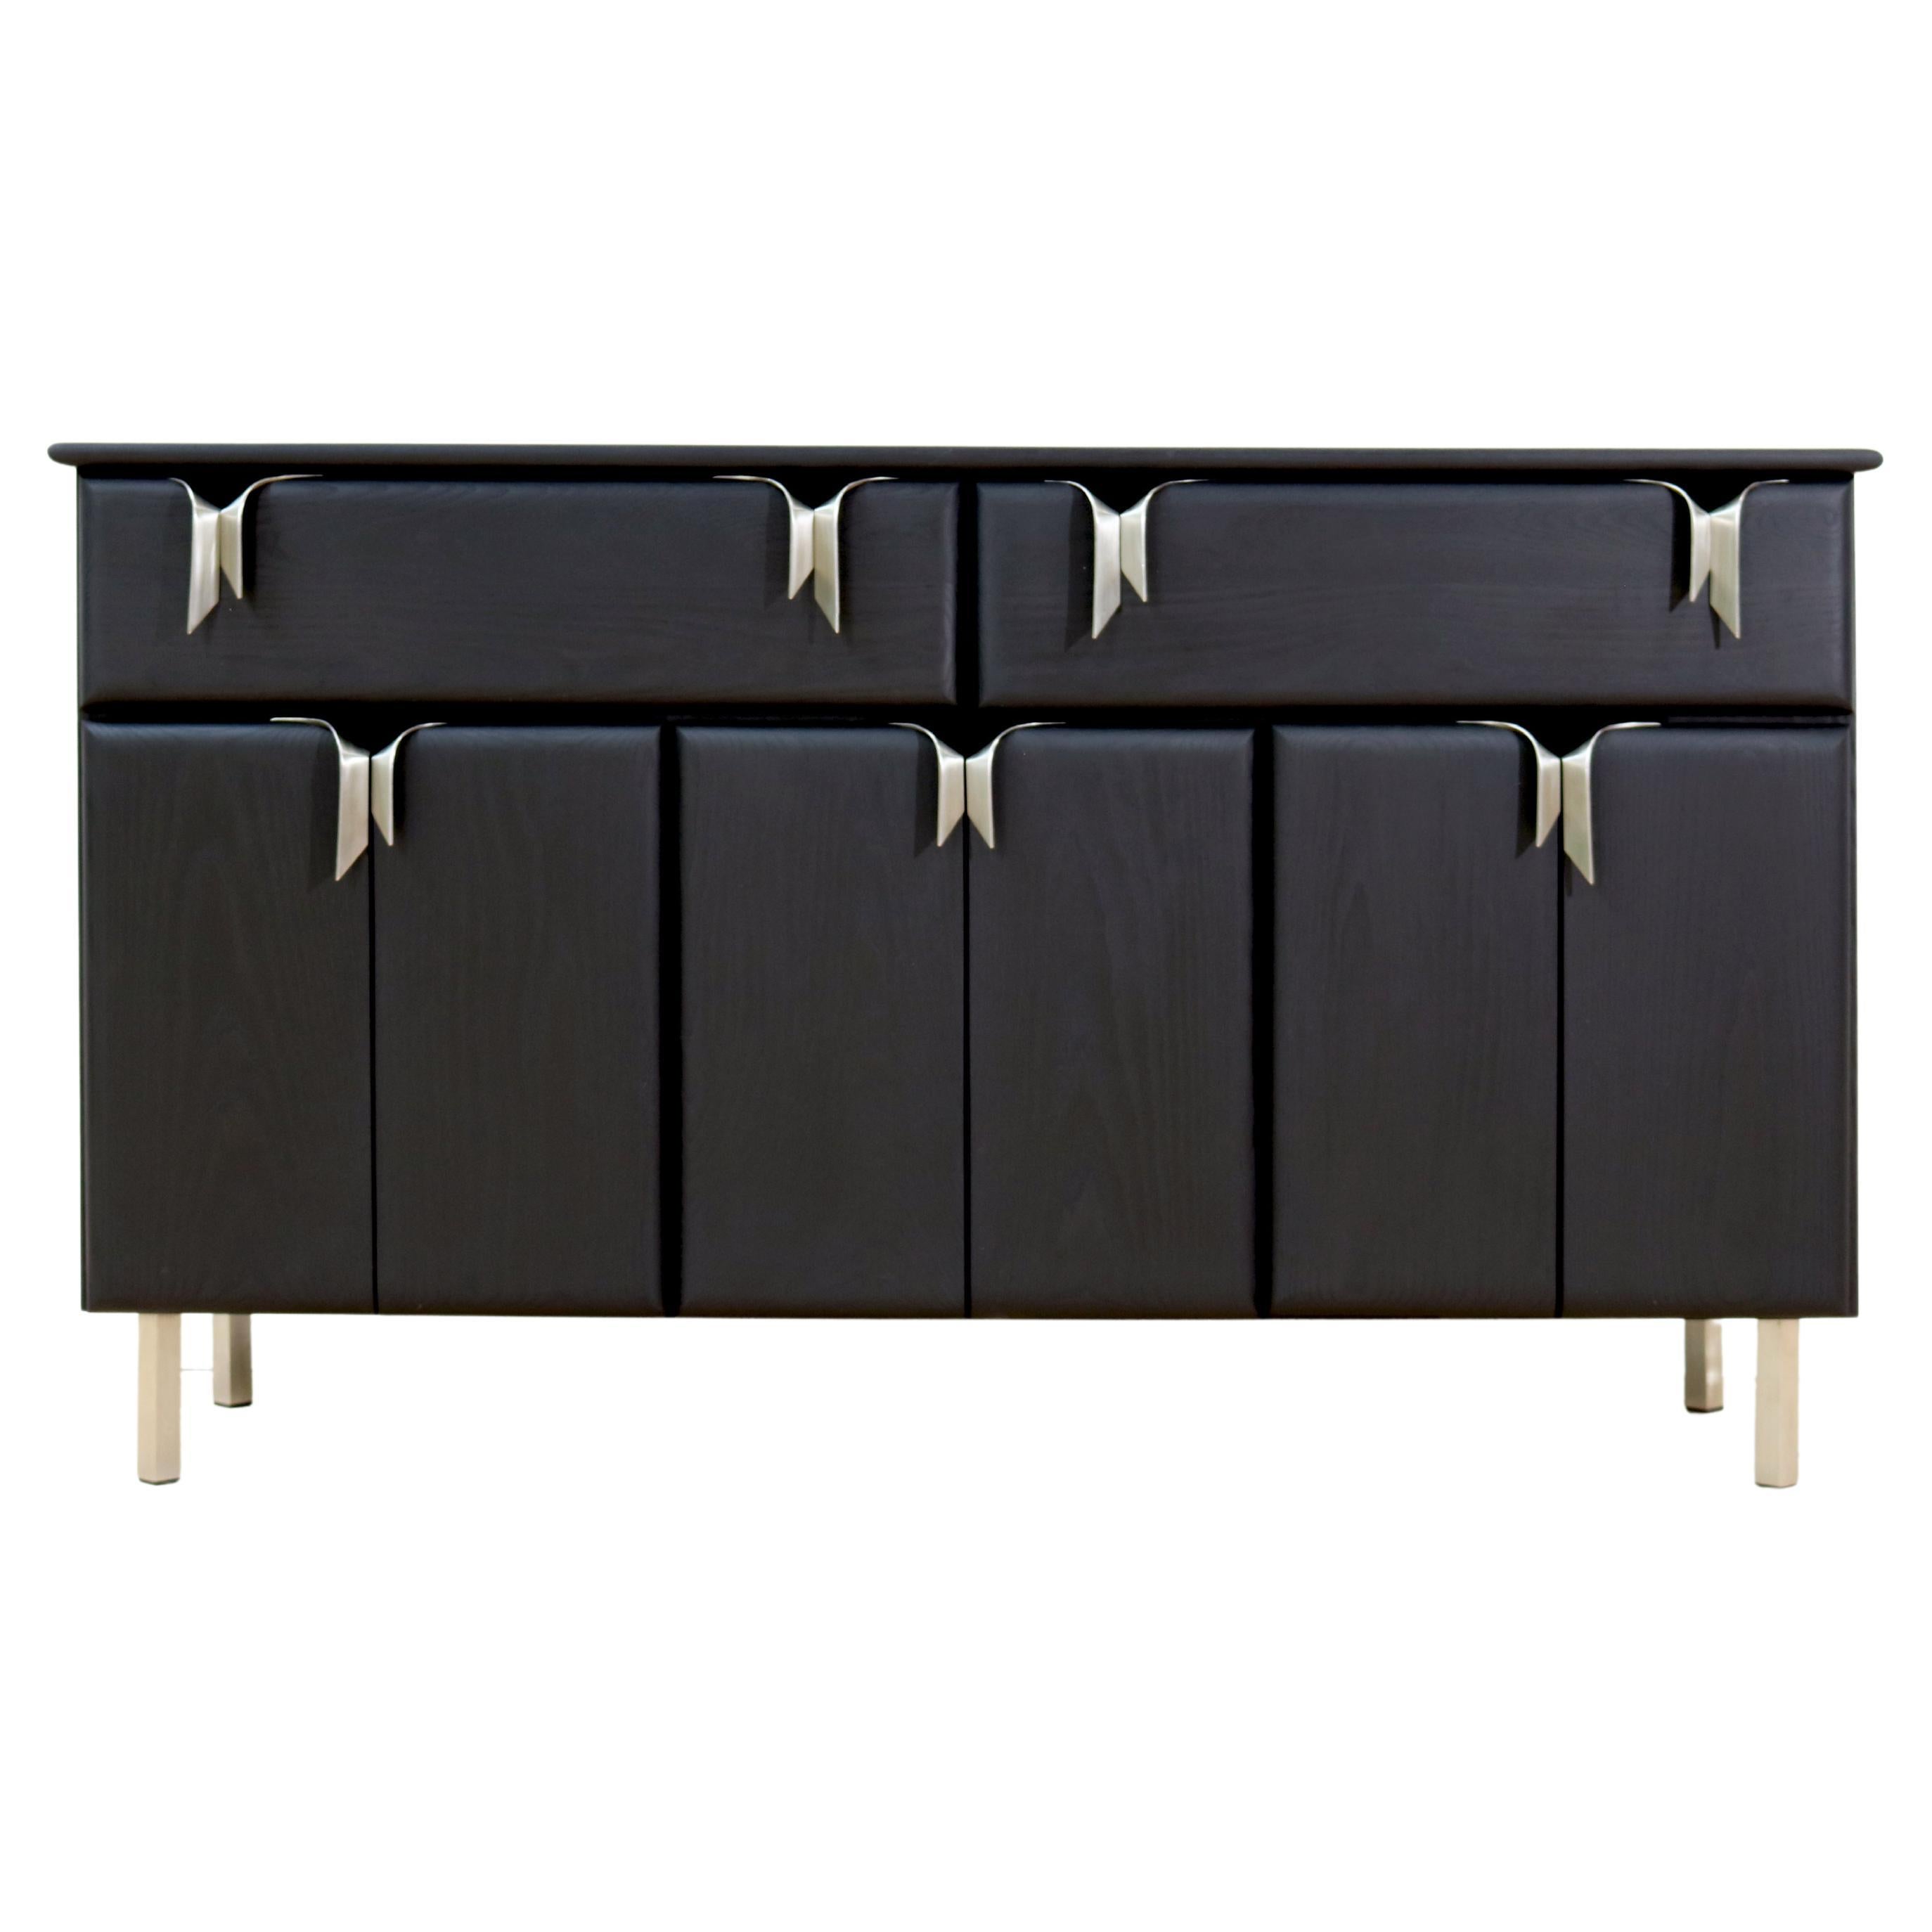 Custom Ribbon Console, Black Stained Ash Wood with Silver Hardware